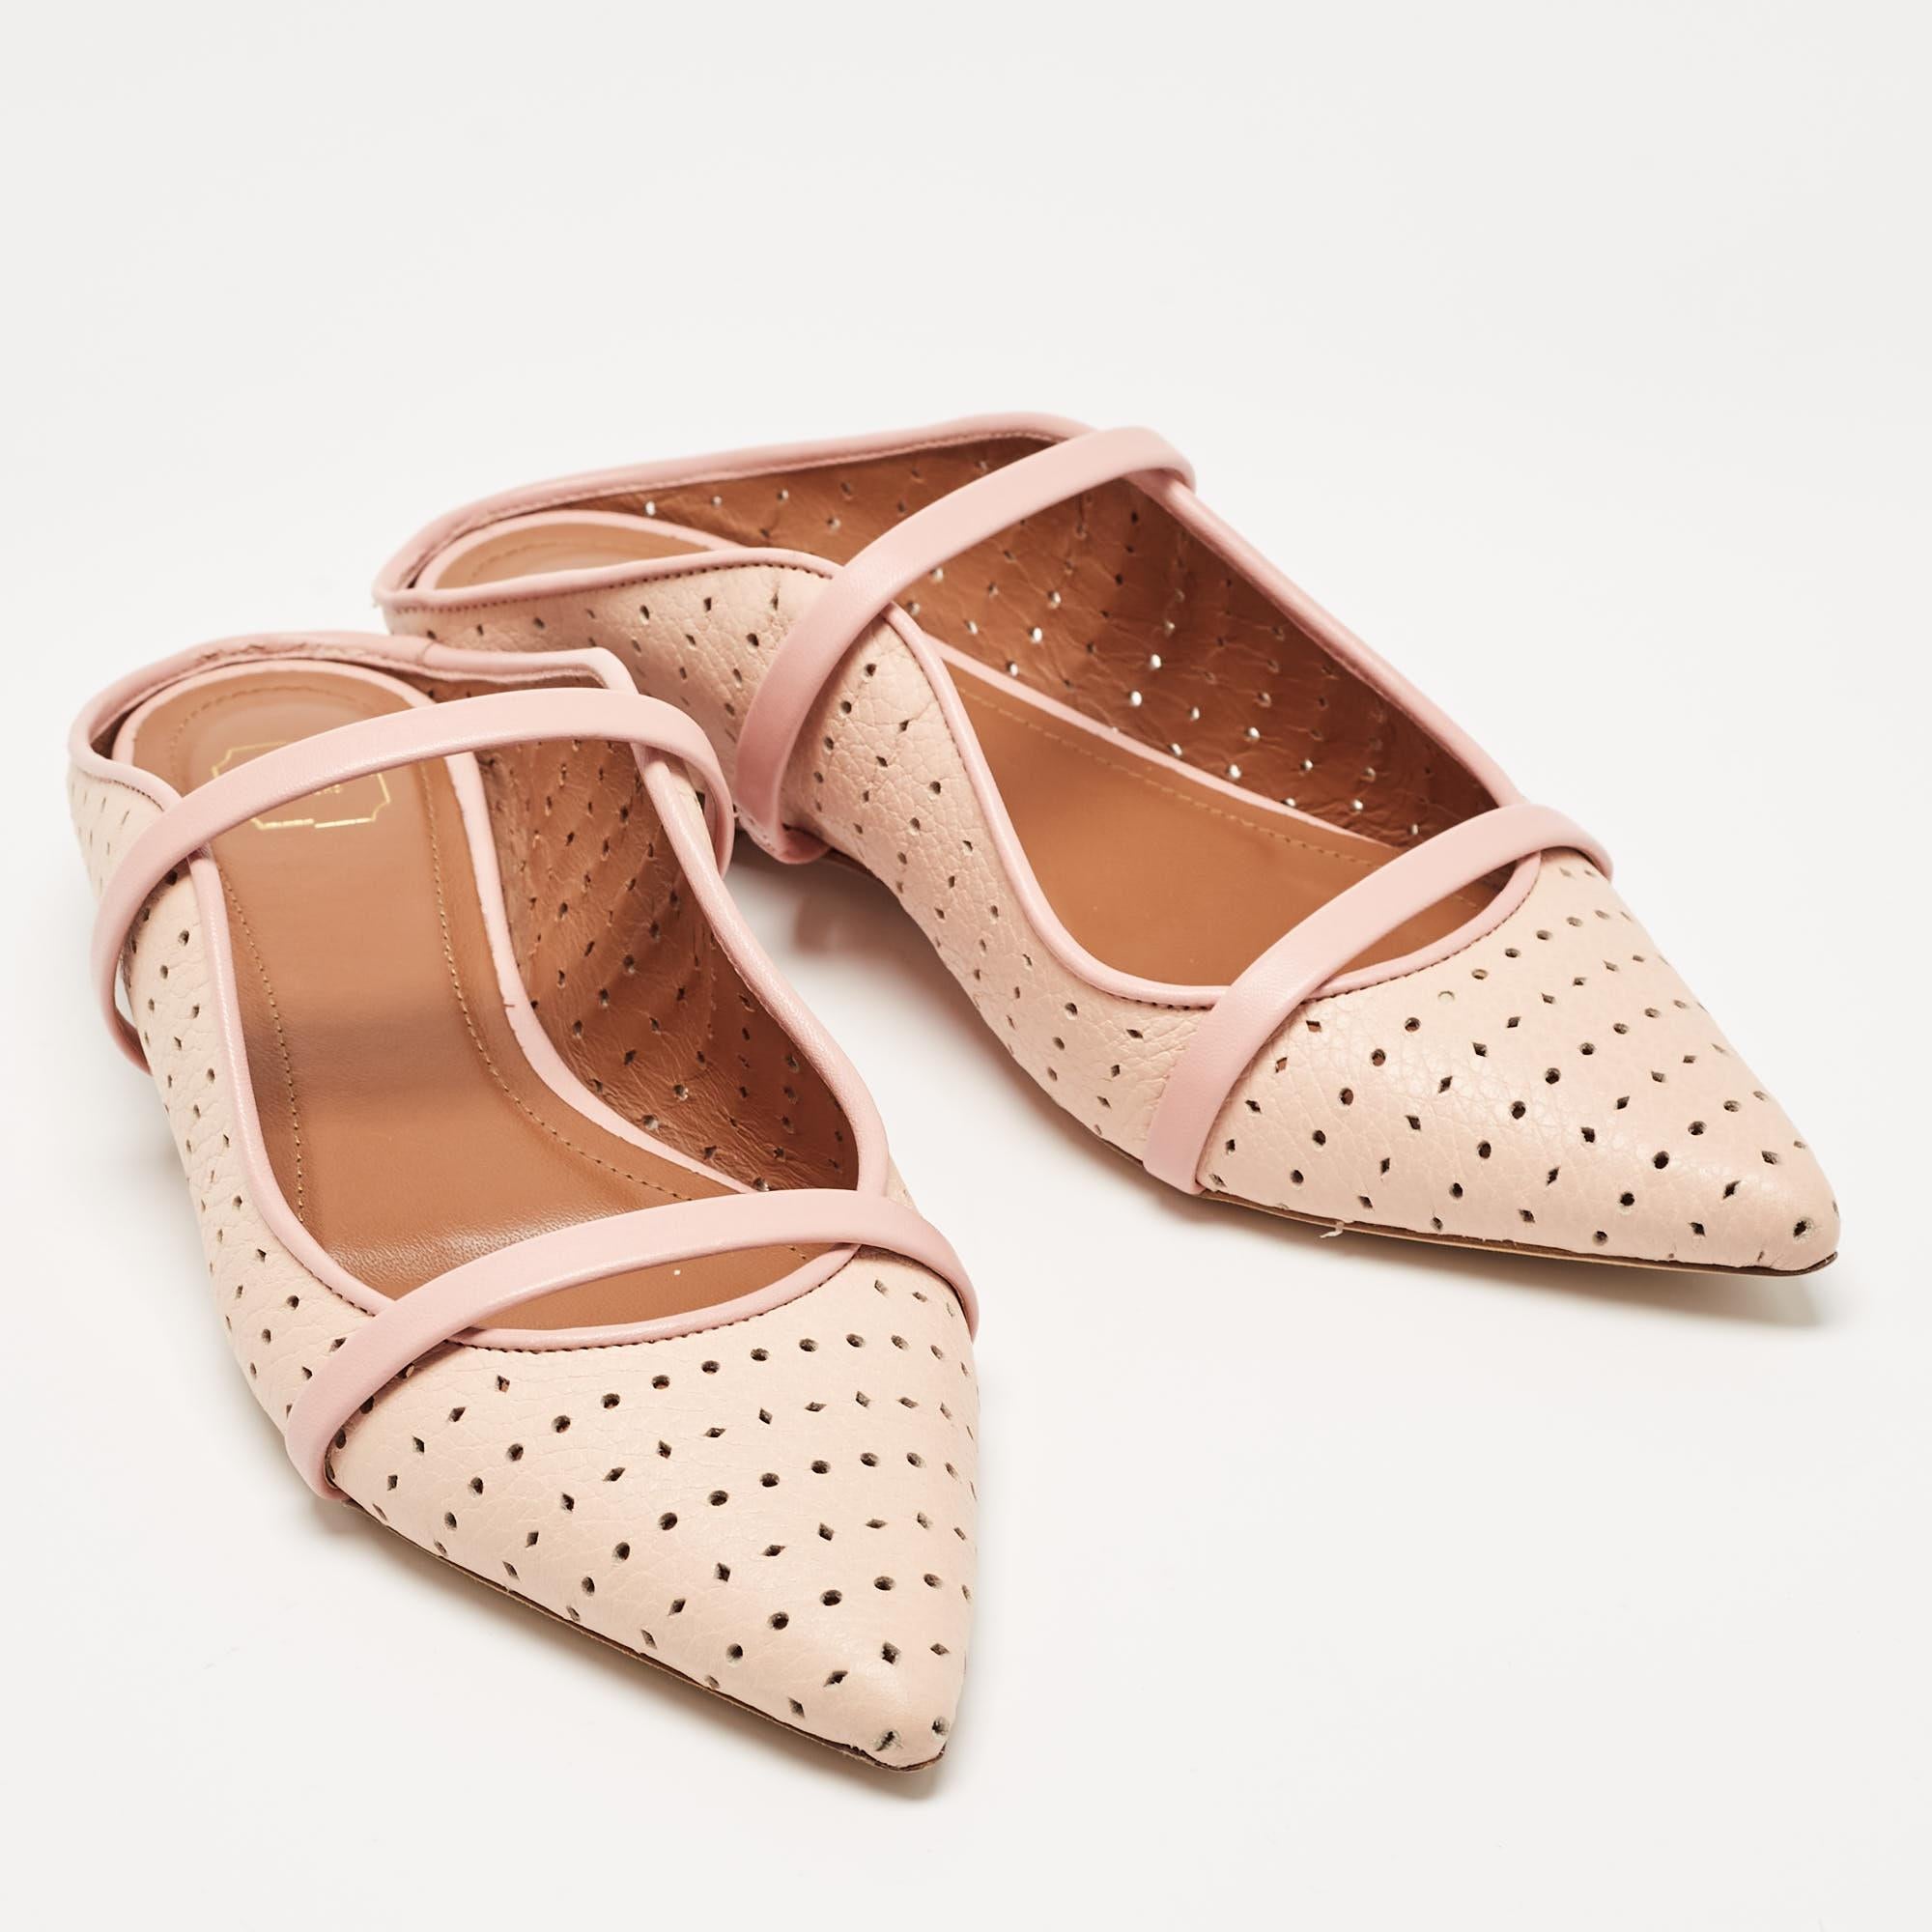 Malone Souliers Pink Perforated Leather Maureen Flat Mules Size 35 In Excellent Condition For Sale In Dubai, Al Qouz 2